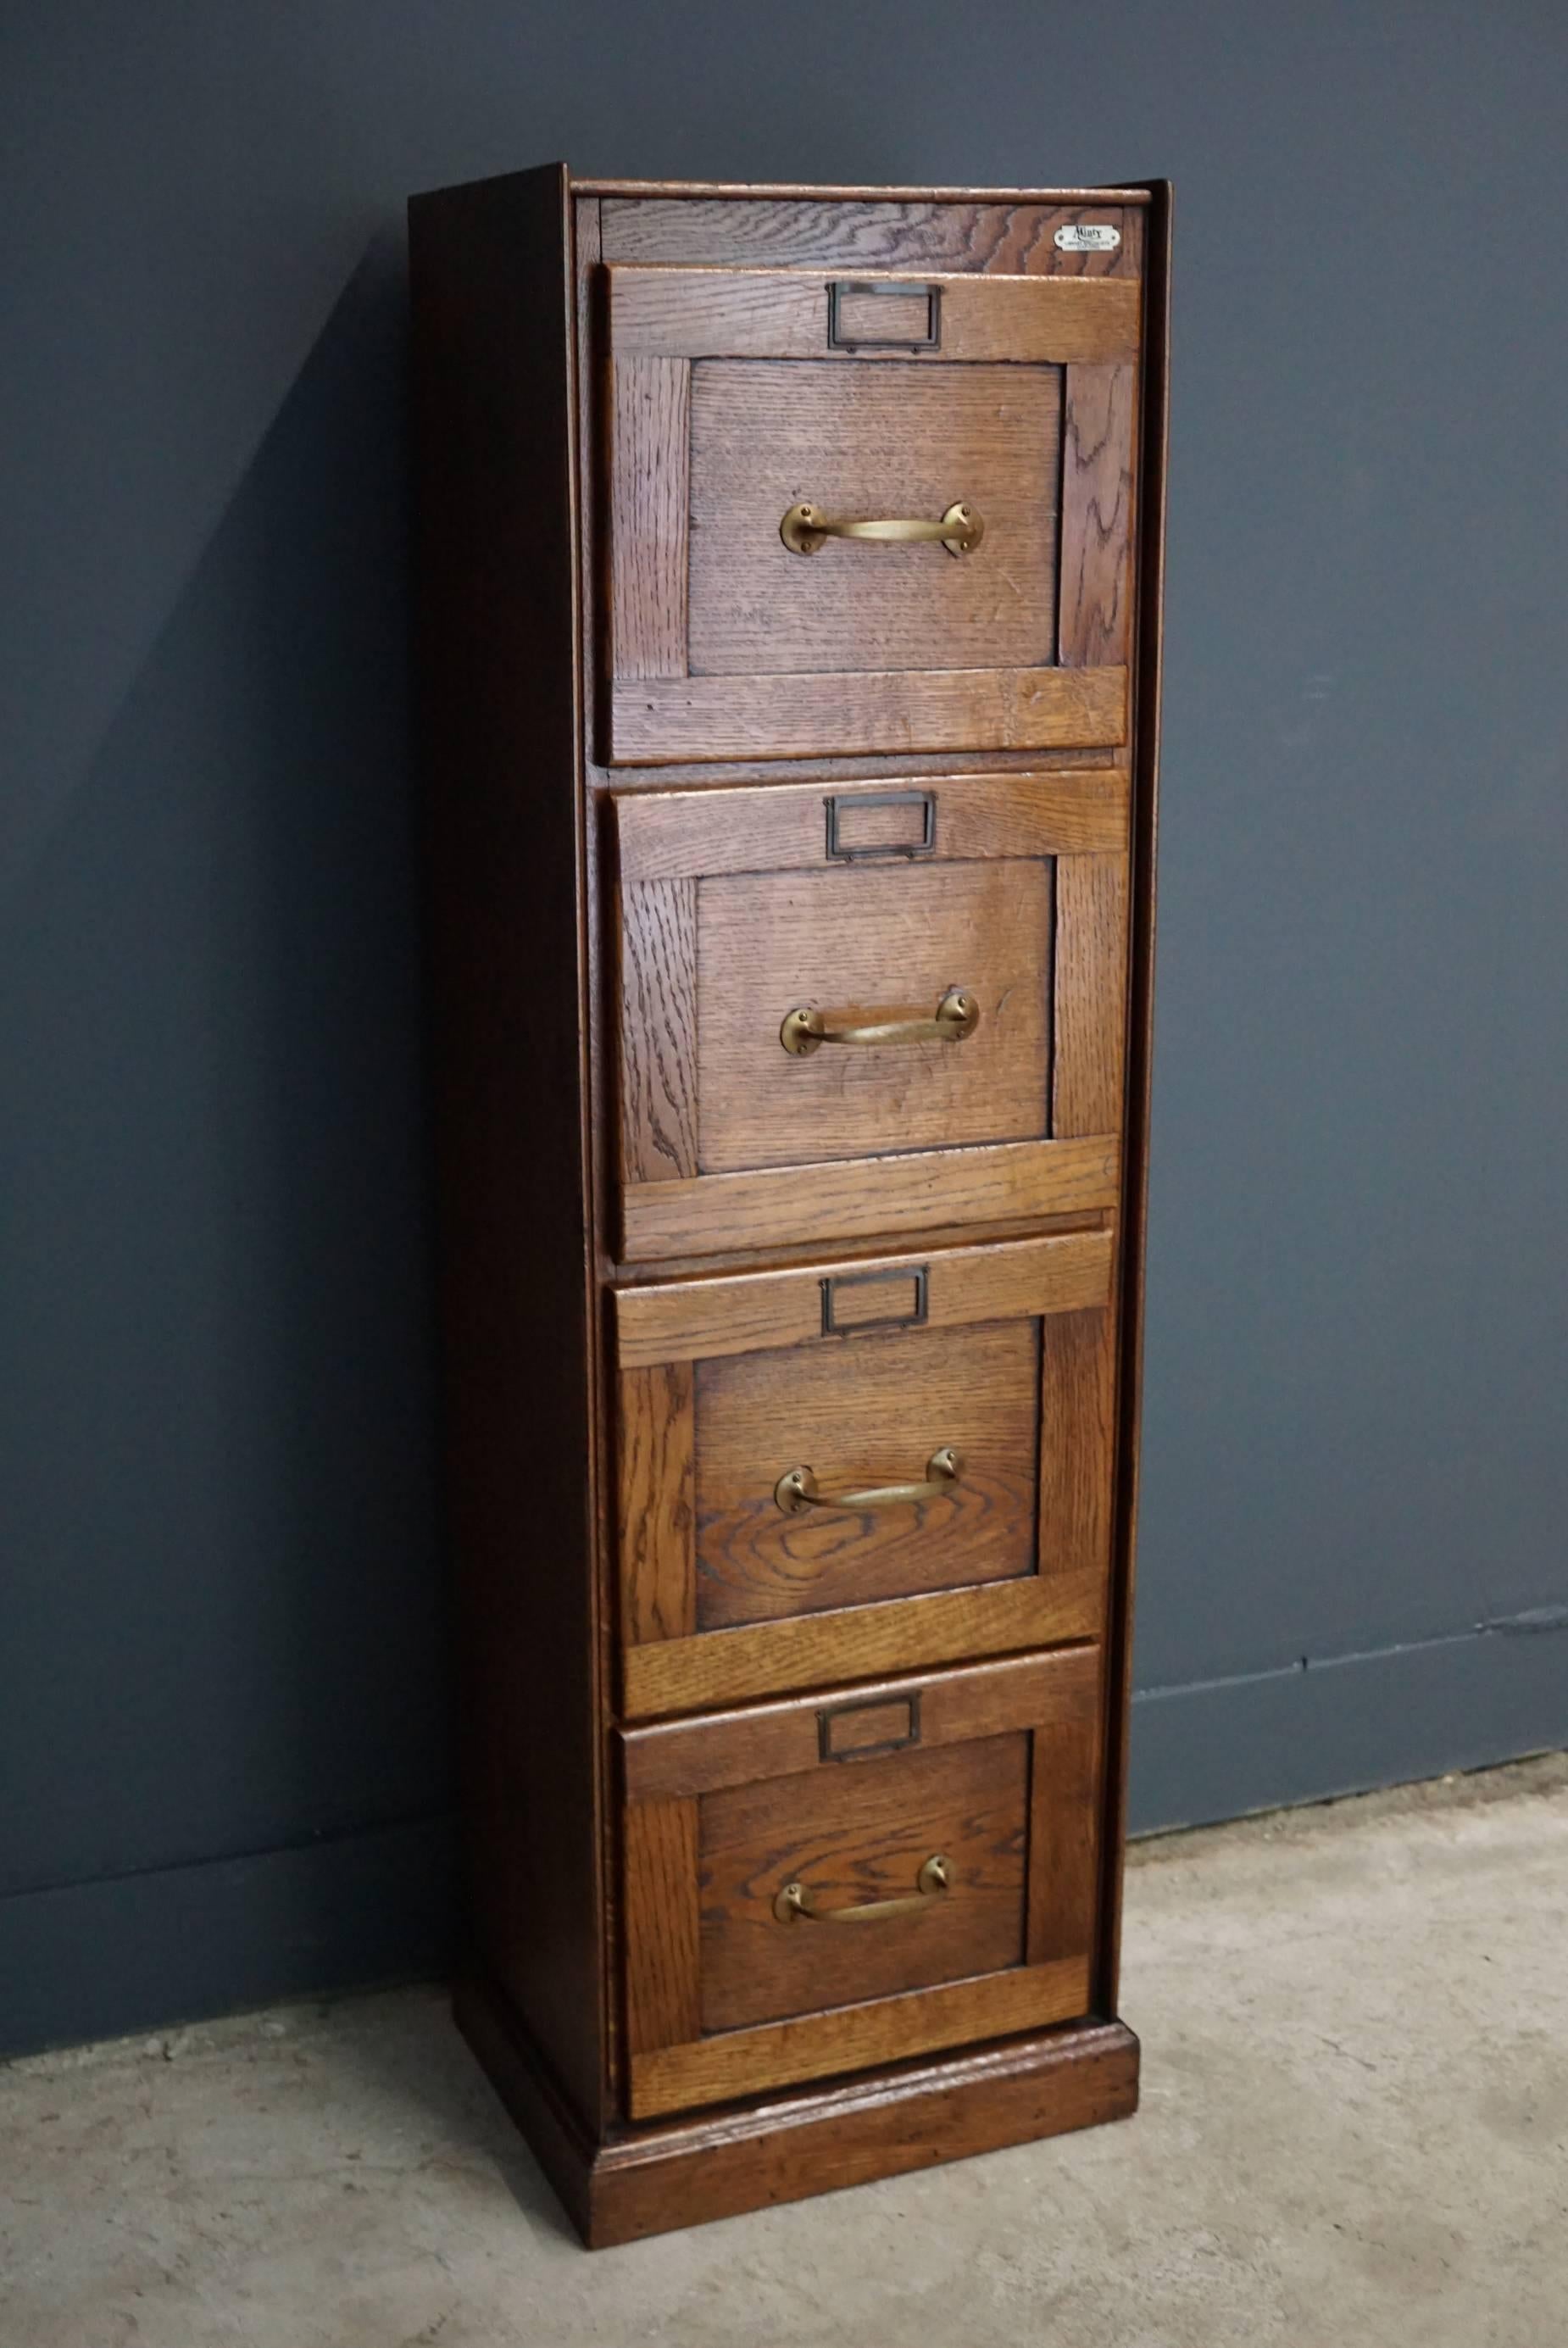 This filing cabinet was designed, circa 1930s in England. The cabinet is made from oak and features four drawers with brass handles.